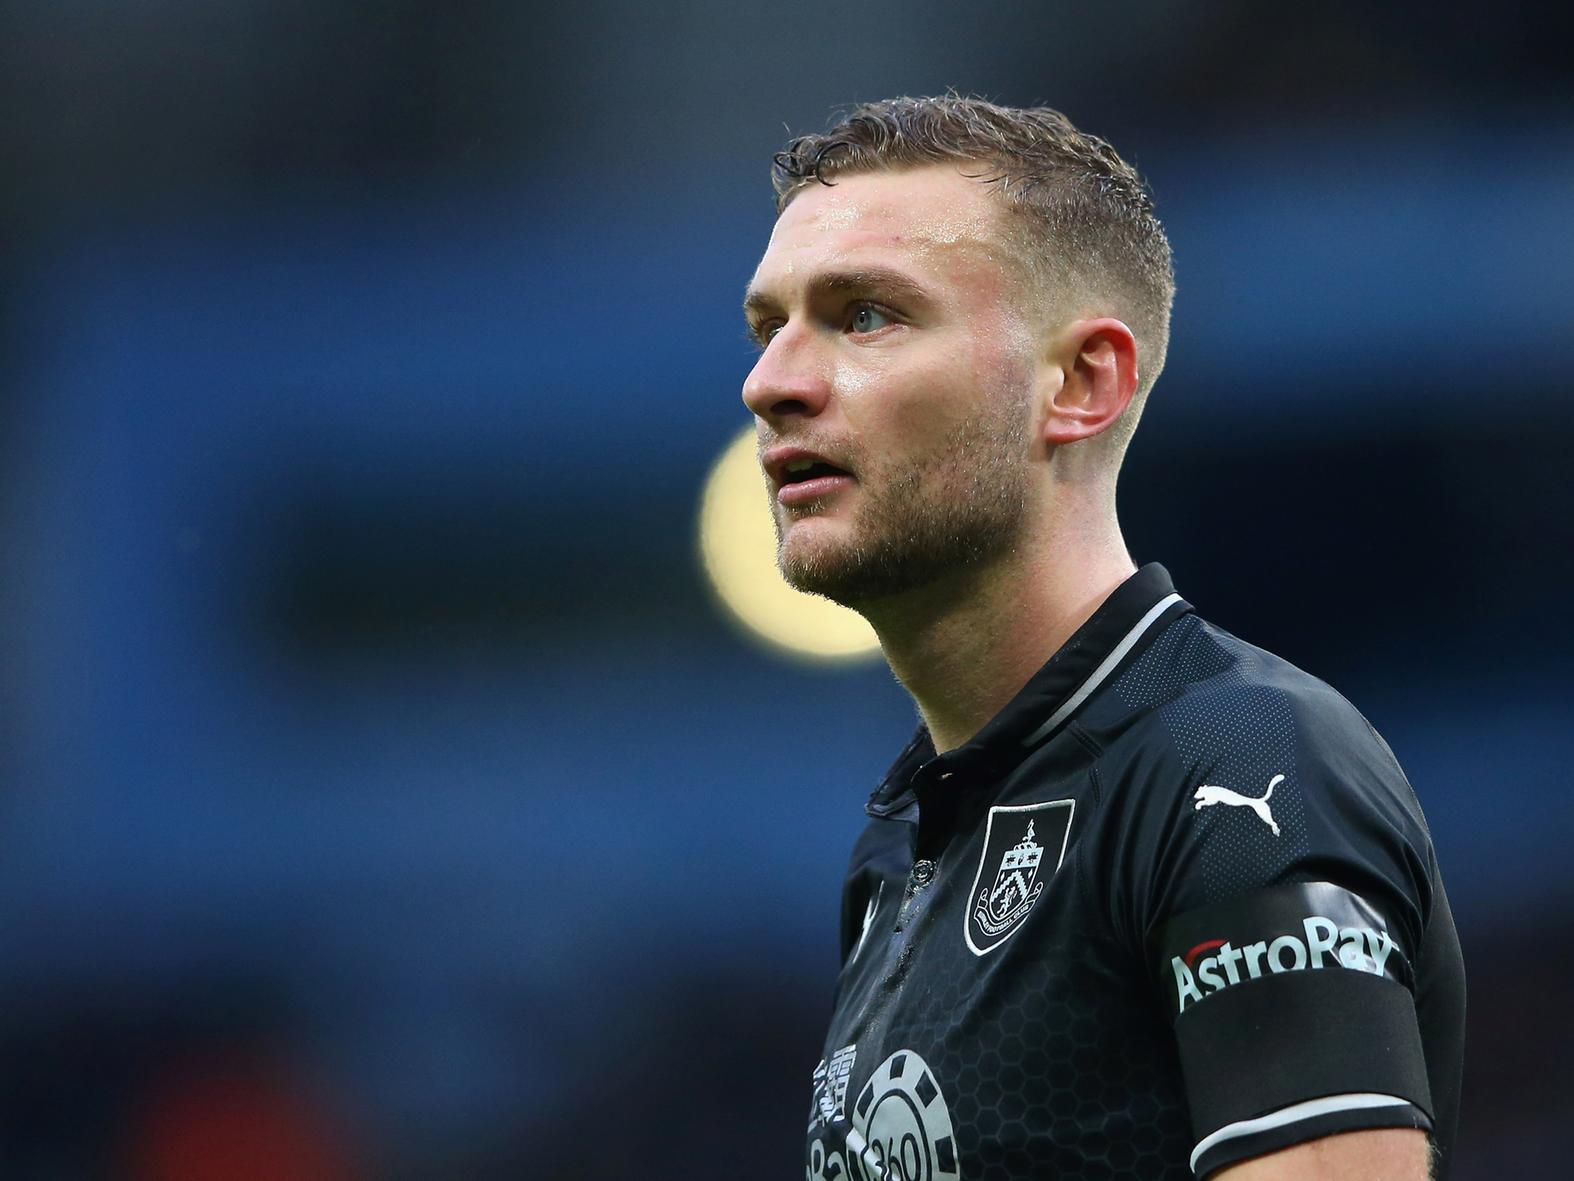 Burnley are understood to have knocked back loan offers from the likes of Middlesbourgh and Fulham for defenderBen Gibson, despite the player make just one appearance since signing in 2018. (Sky Sports)